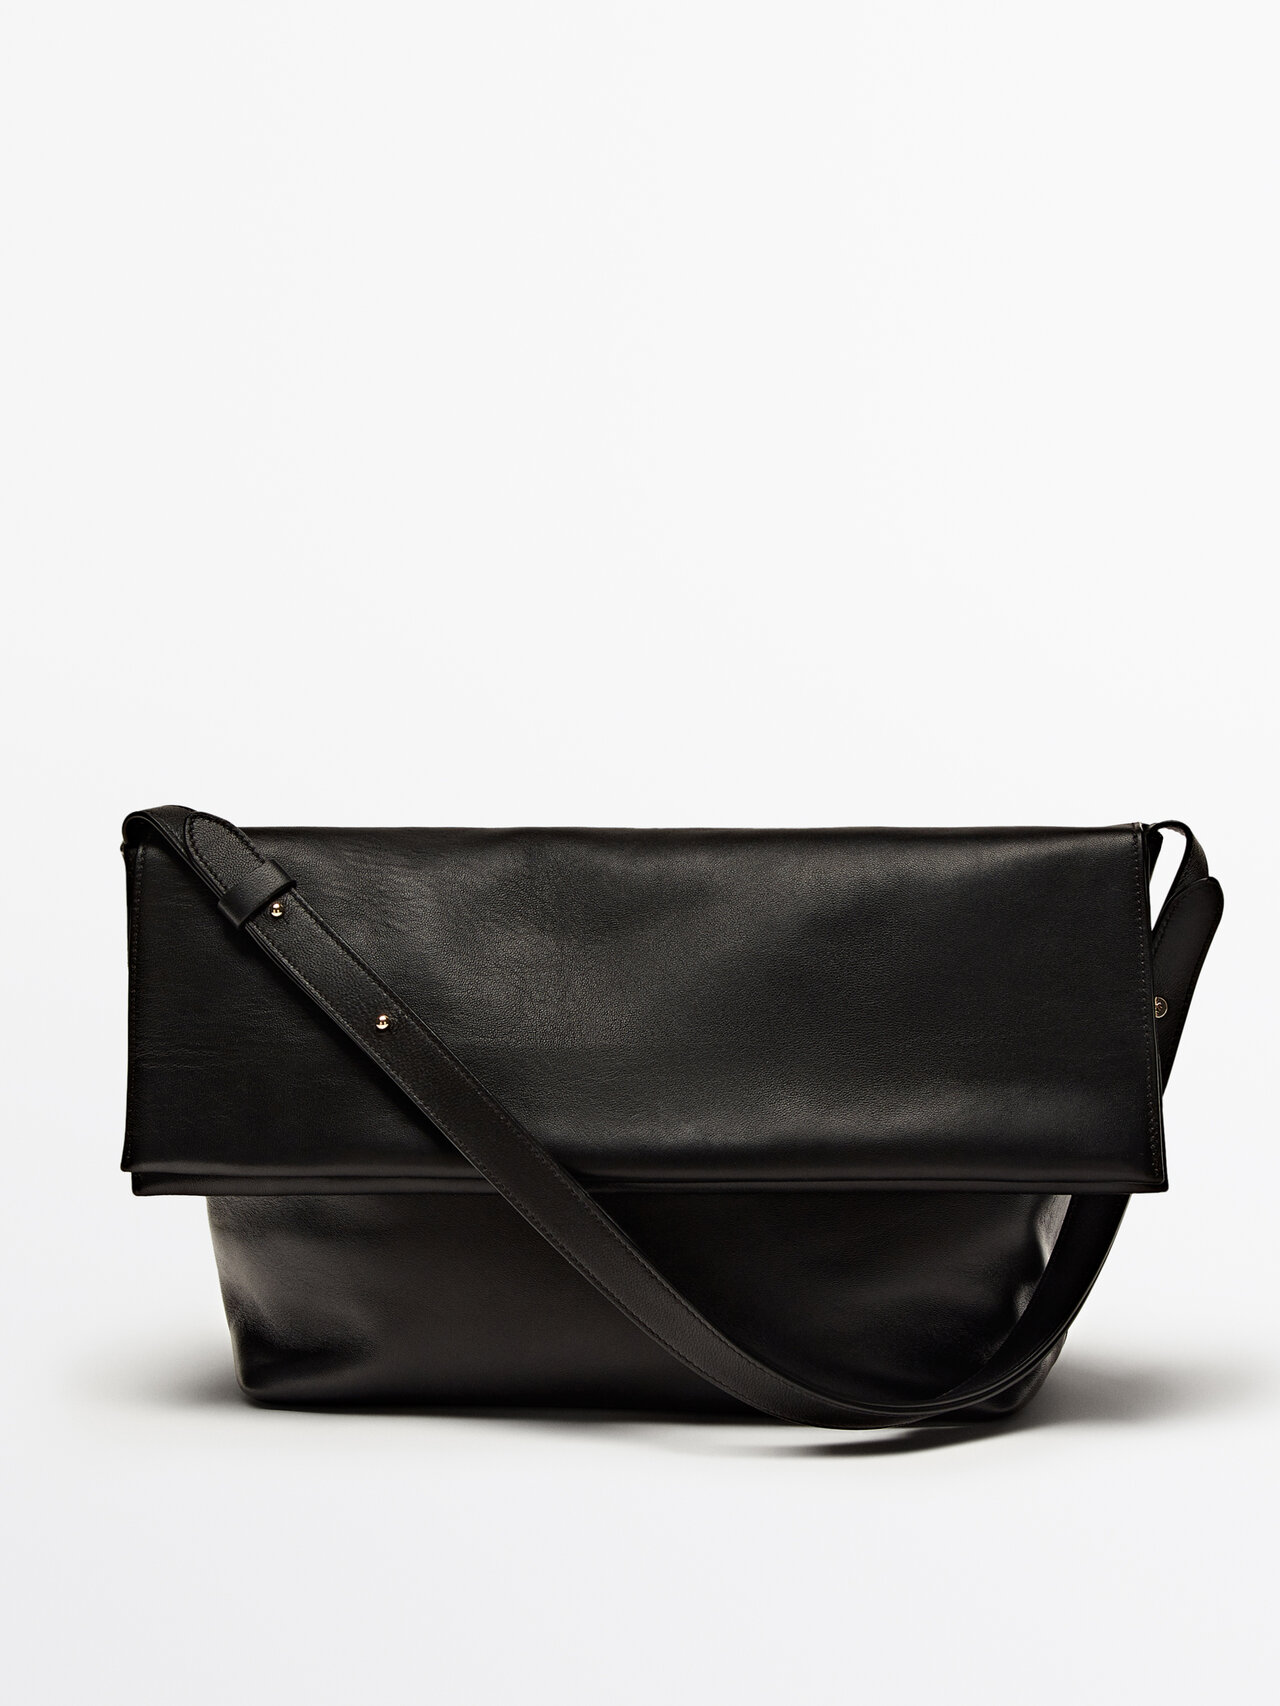 Massimo Dutti Nappa Leather Shoulder Bag With Flap In Black